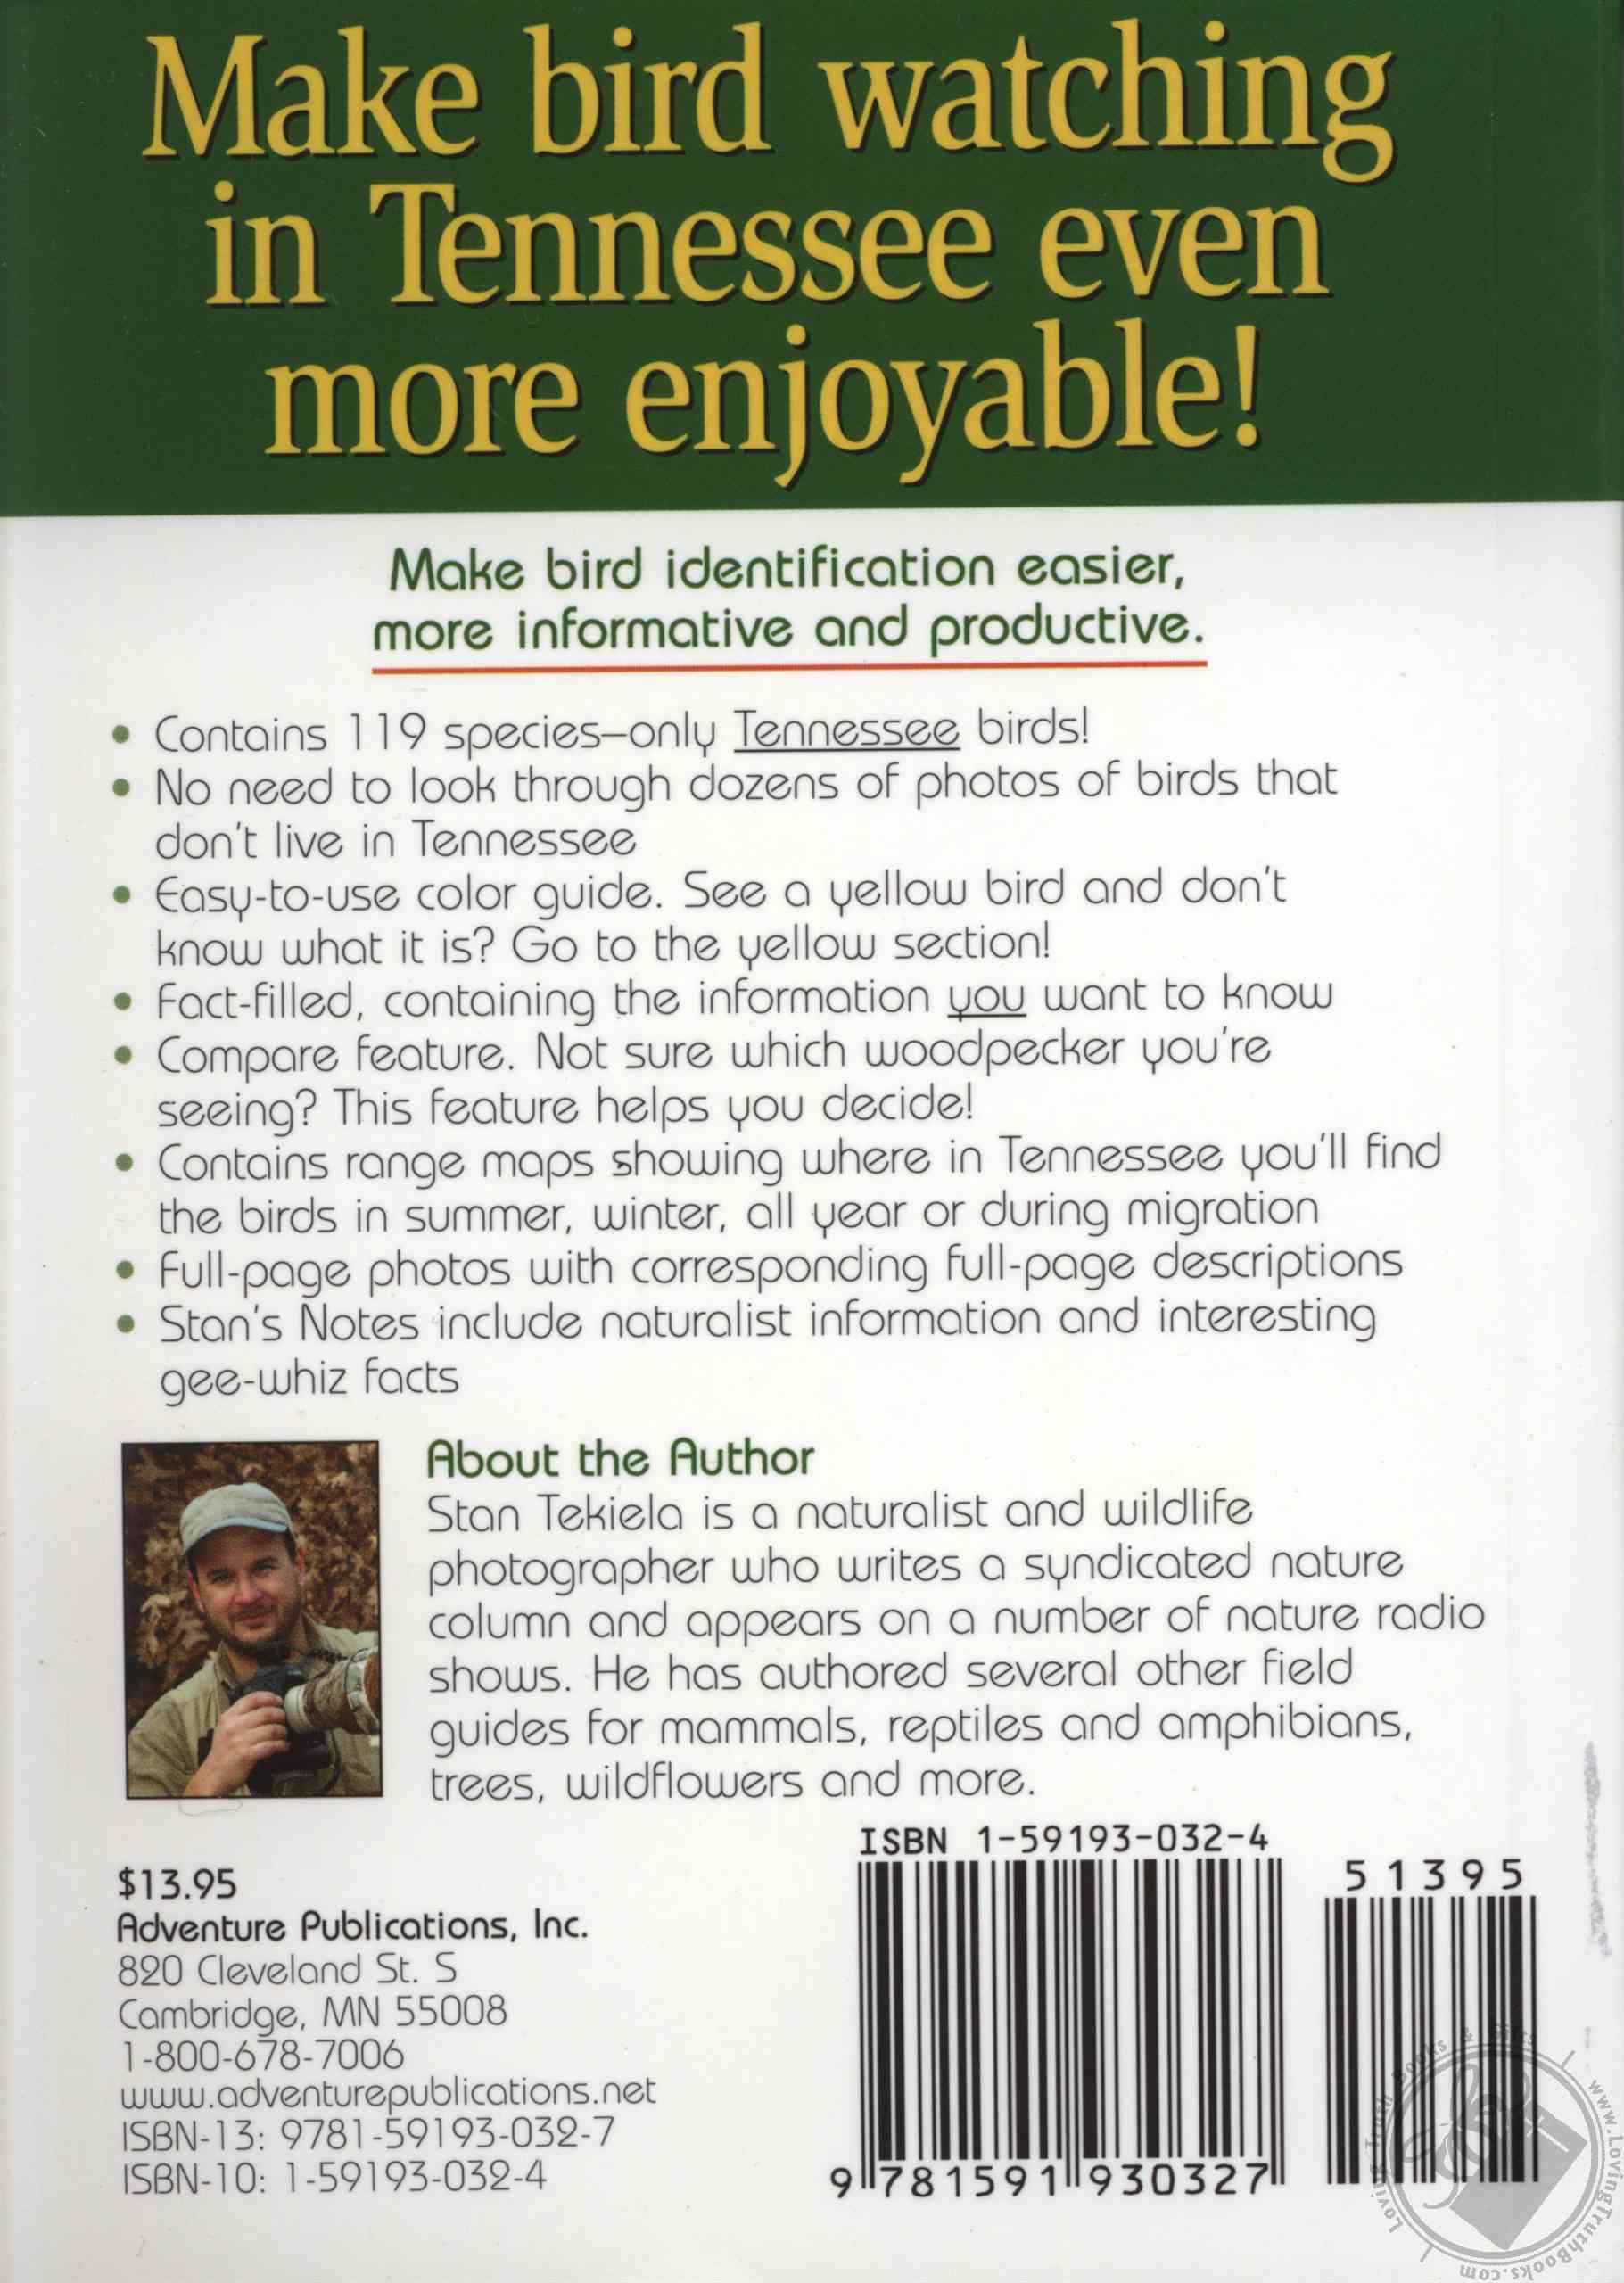 Birds of tennessee field guide